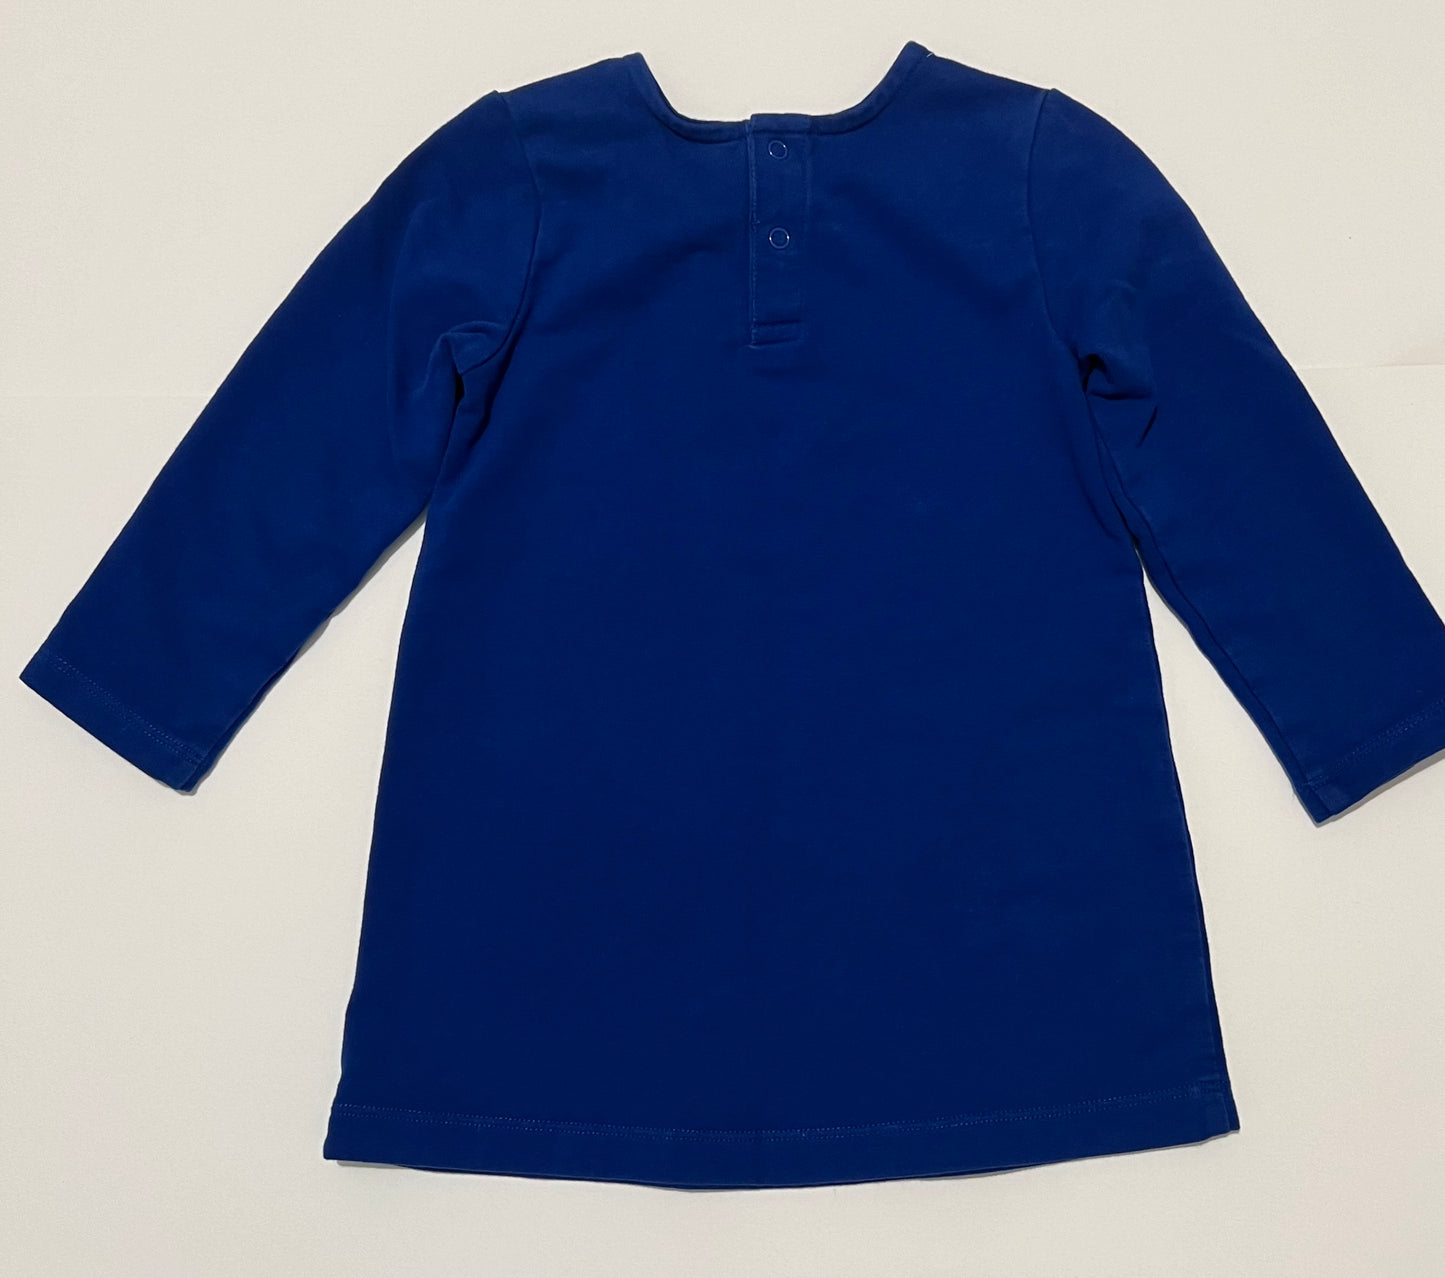 Primary Girls 12-18 months Blue Tunic with Pants